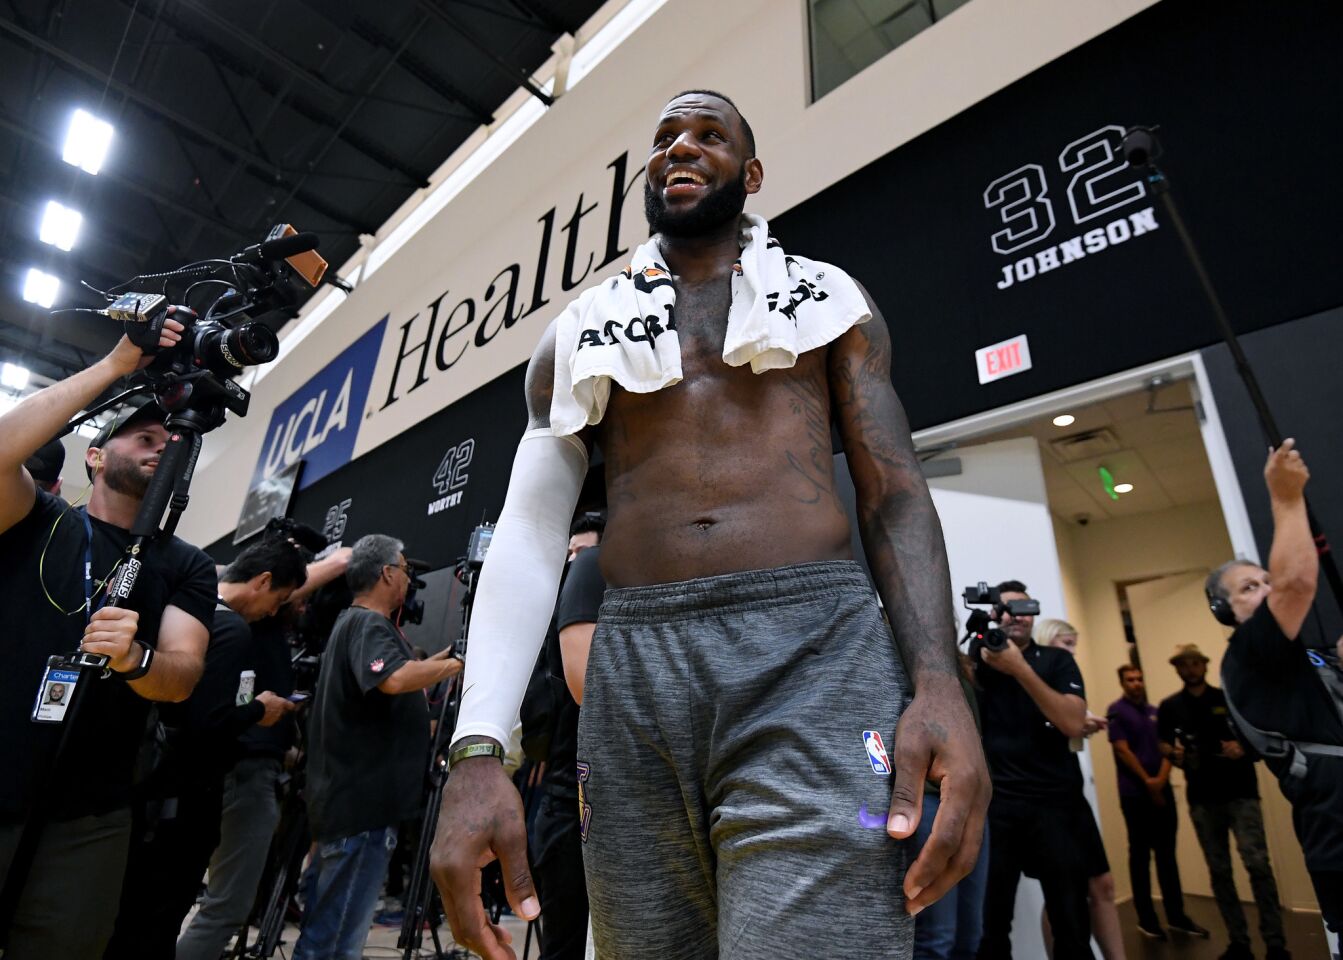 EL SEGUNDO, CA - SEPTEMBER 25: LeBron James of the Los Angeles Lakers laughs as he leaves the court after a Los Angeles Lakers practice session at the UCLA Health Training Center on September 25, 2018 in El Segundo, California. (Photo by Harry How/Getty Images) ** OUTS - ELSENT, FPG, CM - OUTS * NM, PH, VA if sourced by CT, LA or MoD **